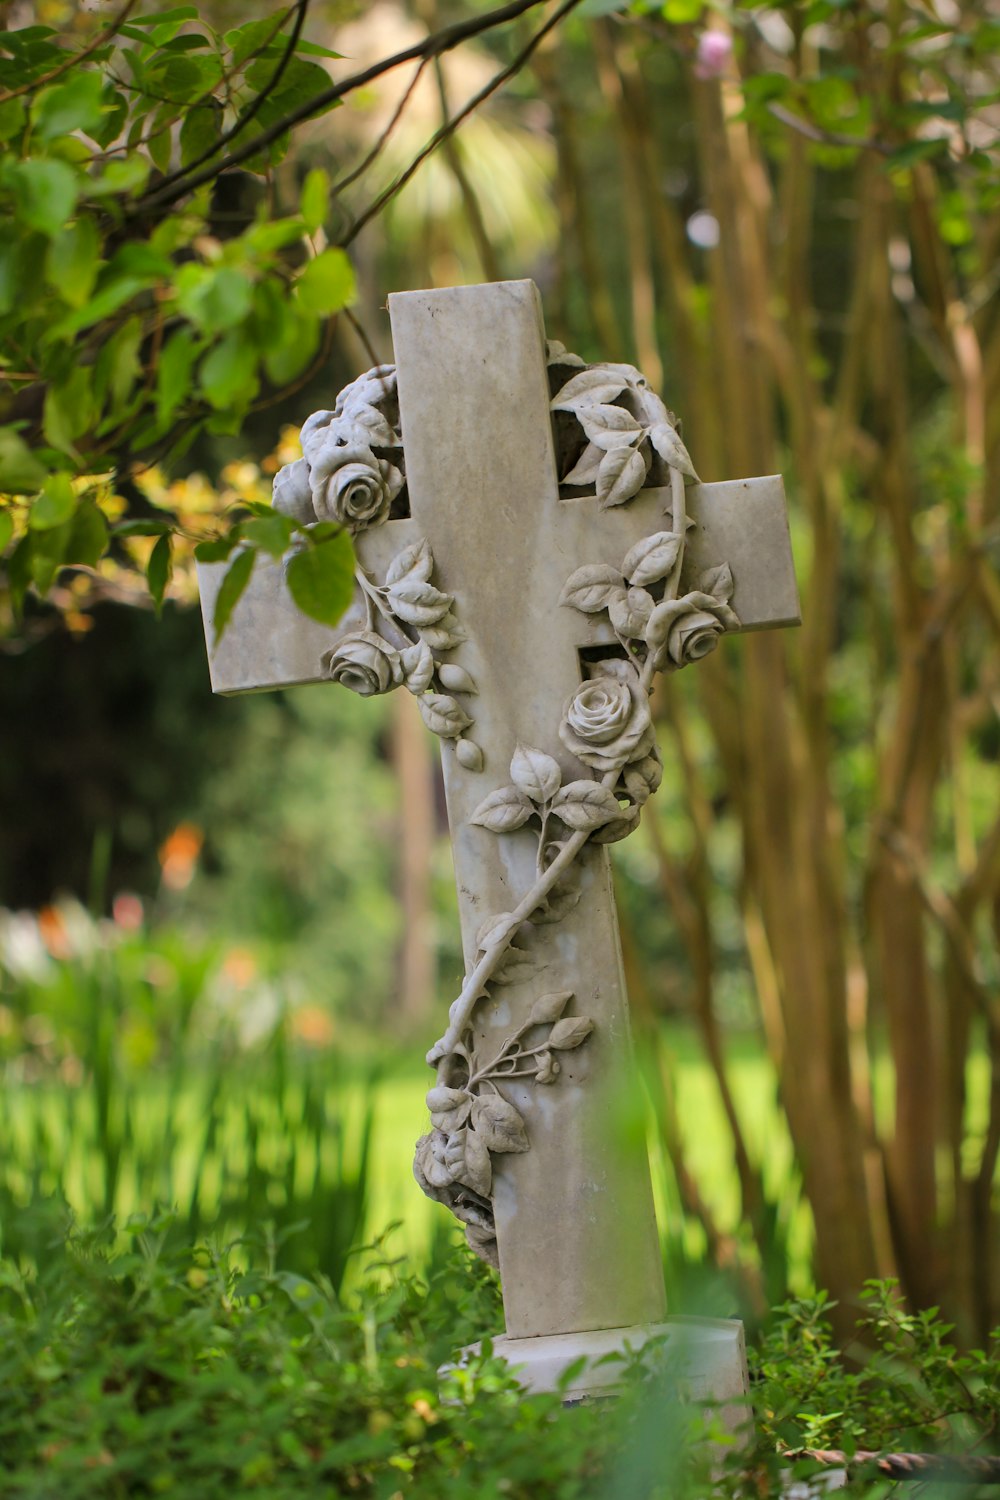 a cross with a statue of a person on it